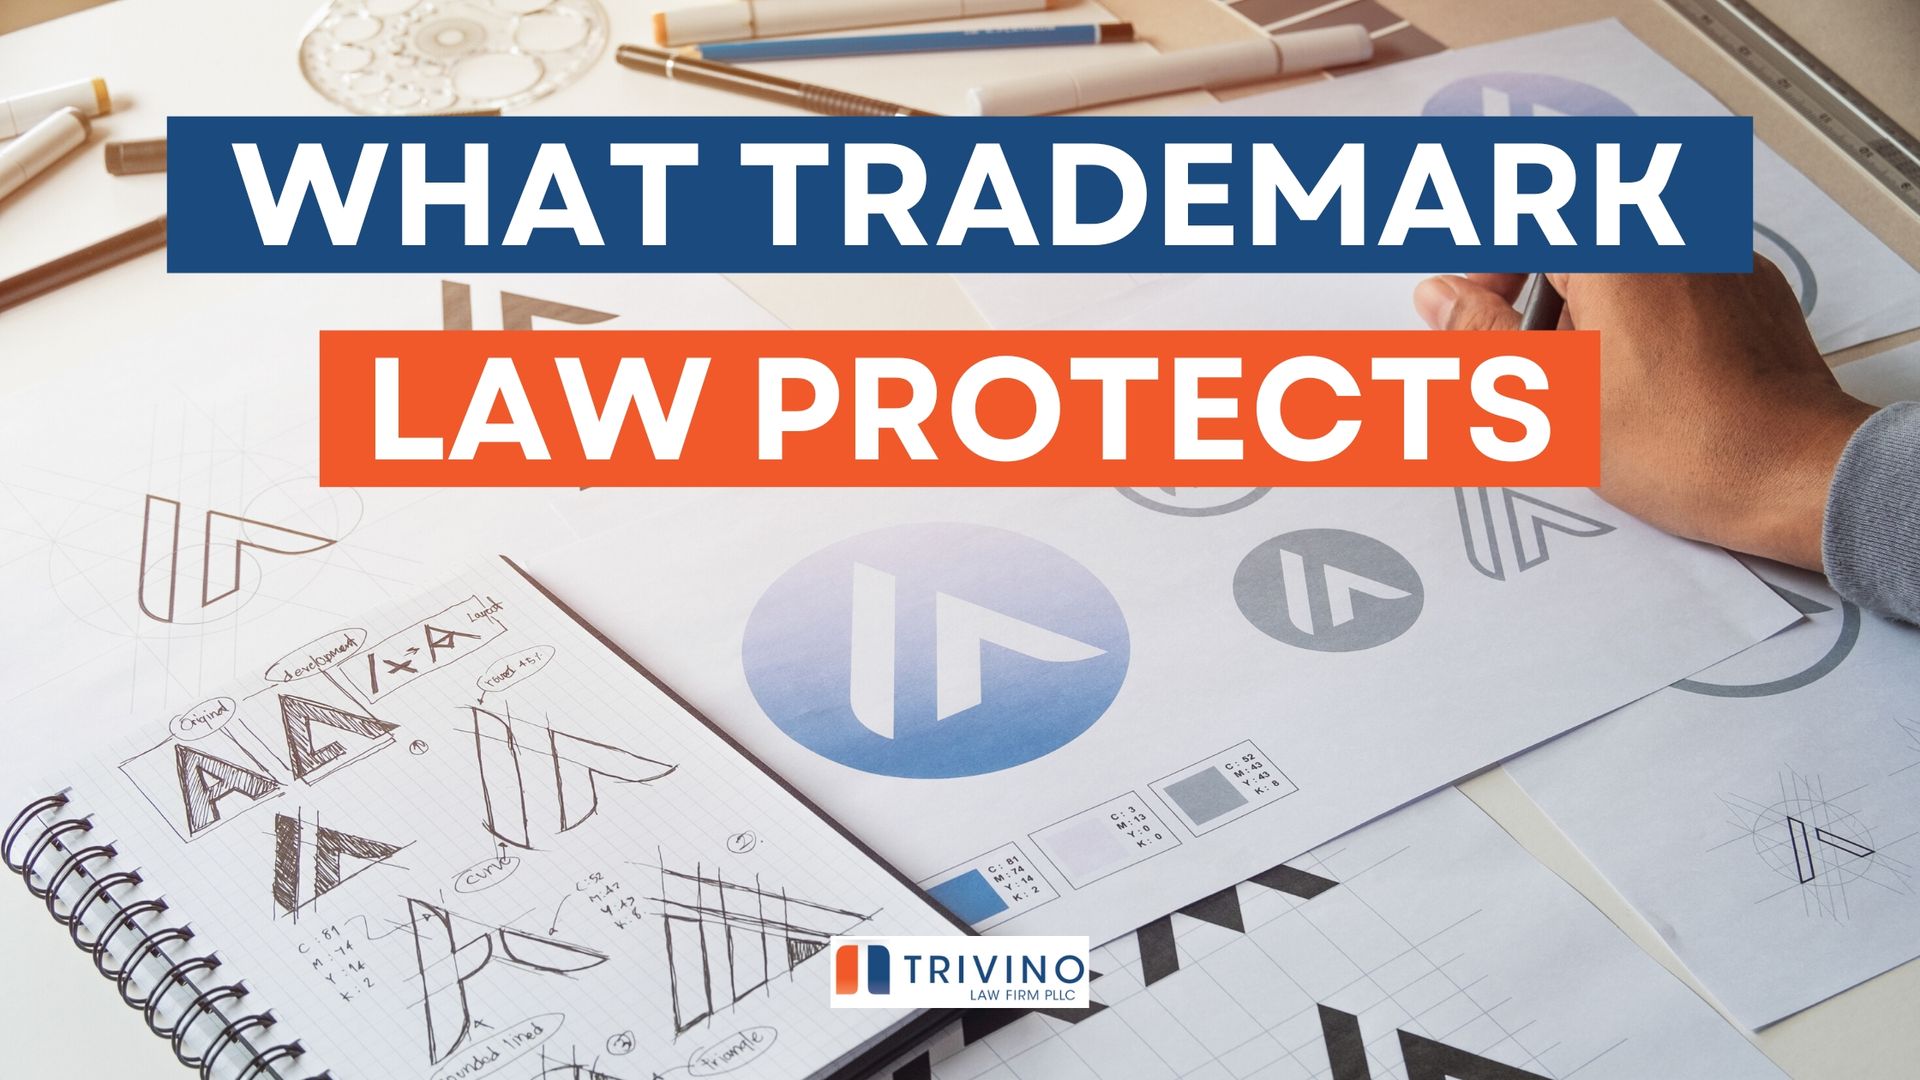 What Trademark Law Protects